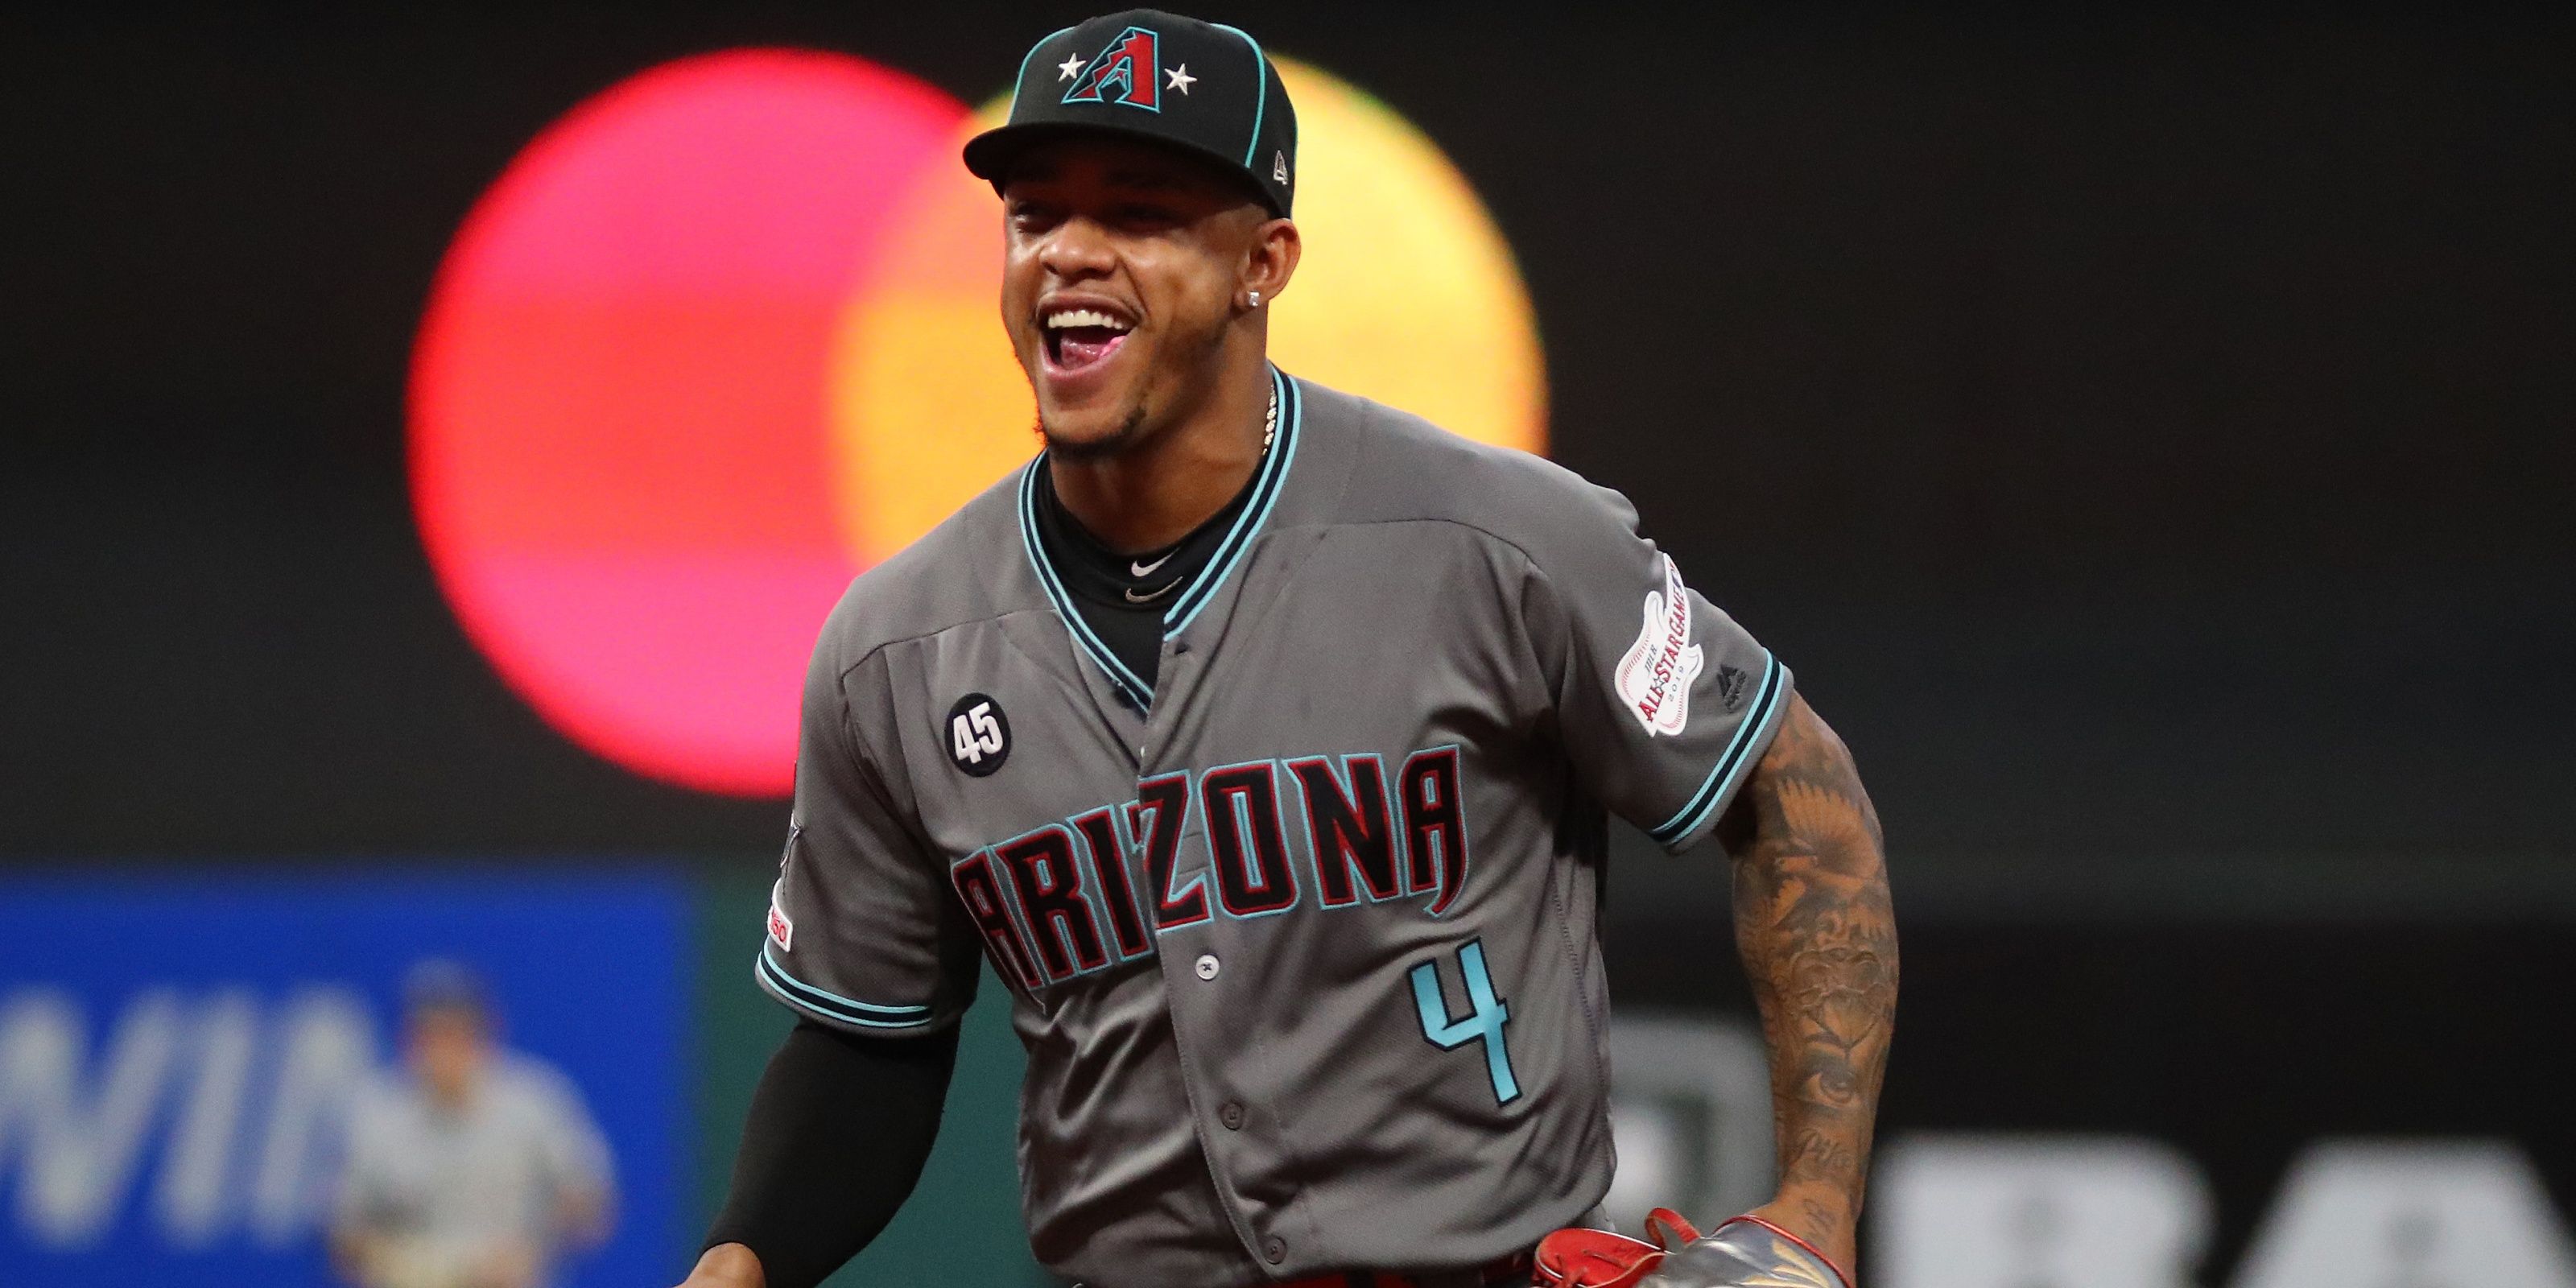 ketel marte smiling and laughing on the field